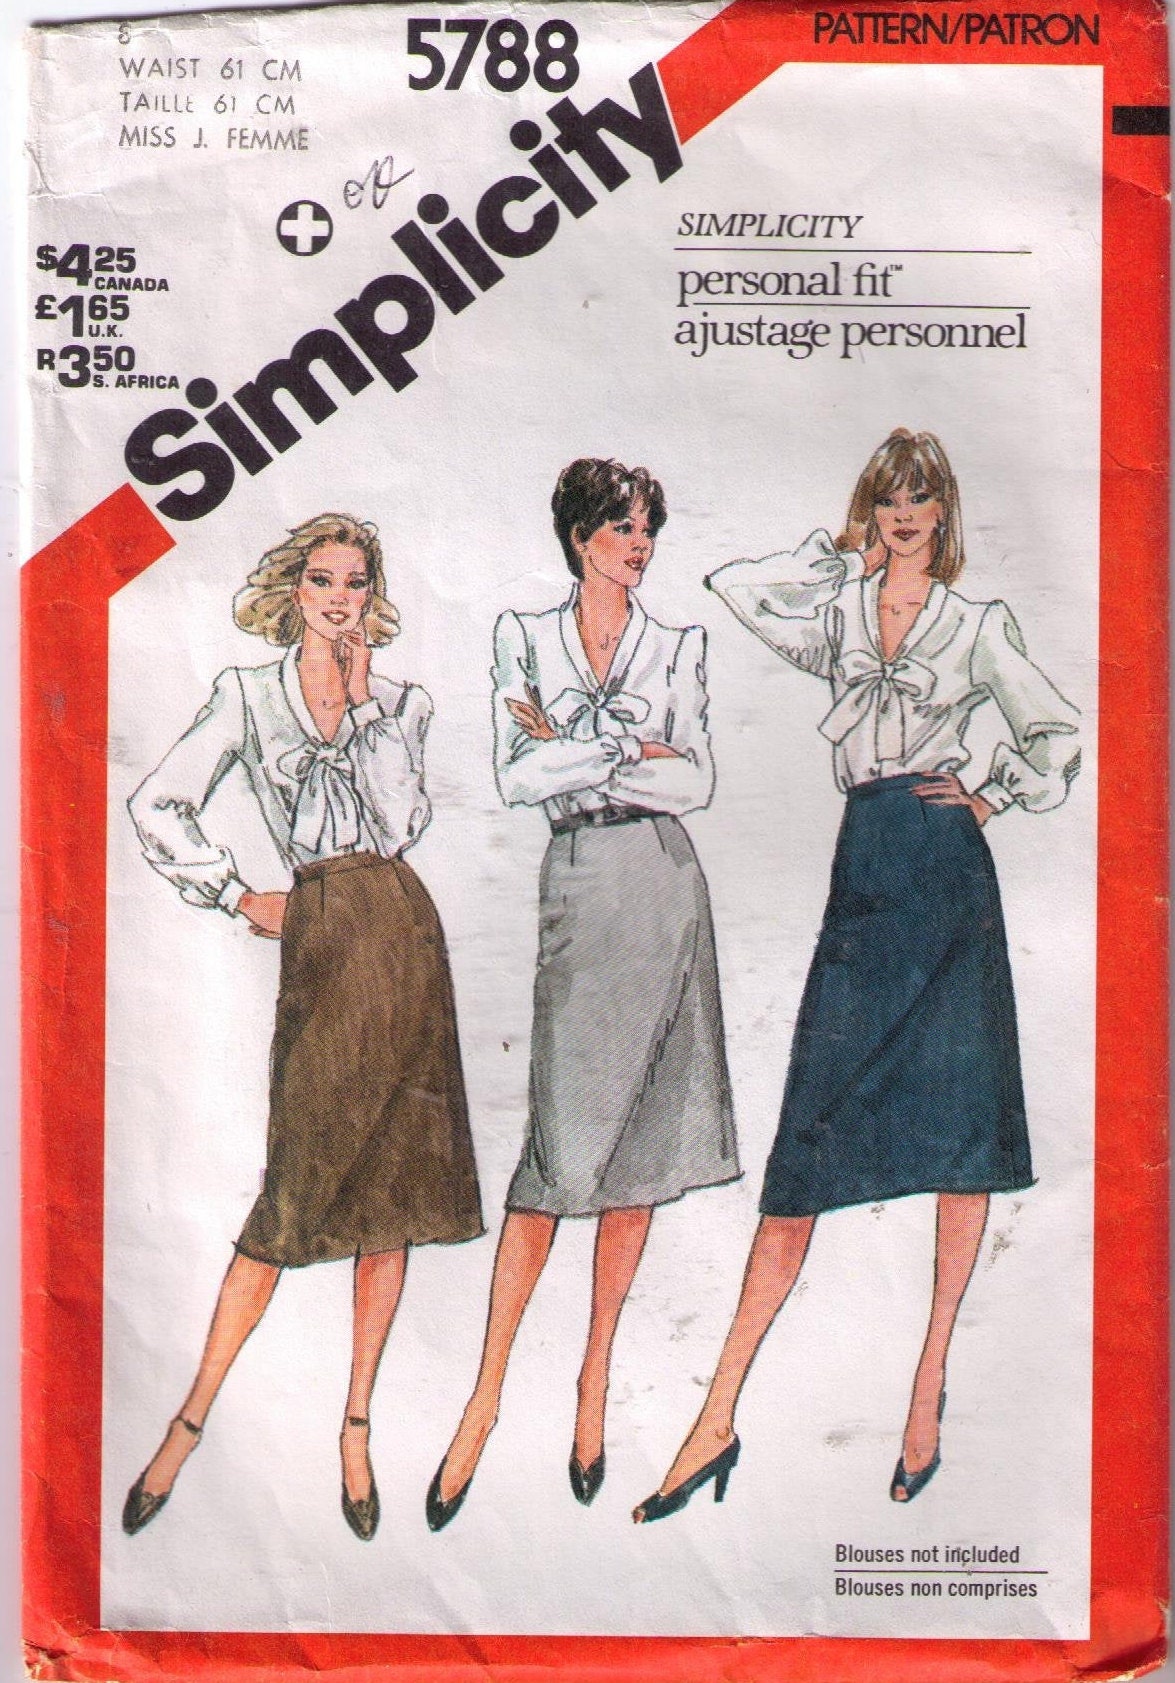 Vintage 1960-1970s Simplicity/mccalls Sewing Patterns, Women's Sewing  Patterns, Collectible Patterns Sold Separately 